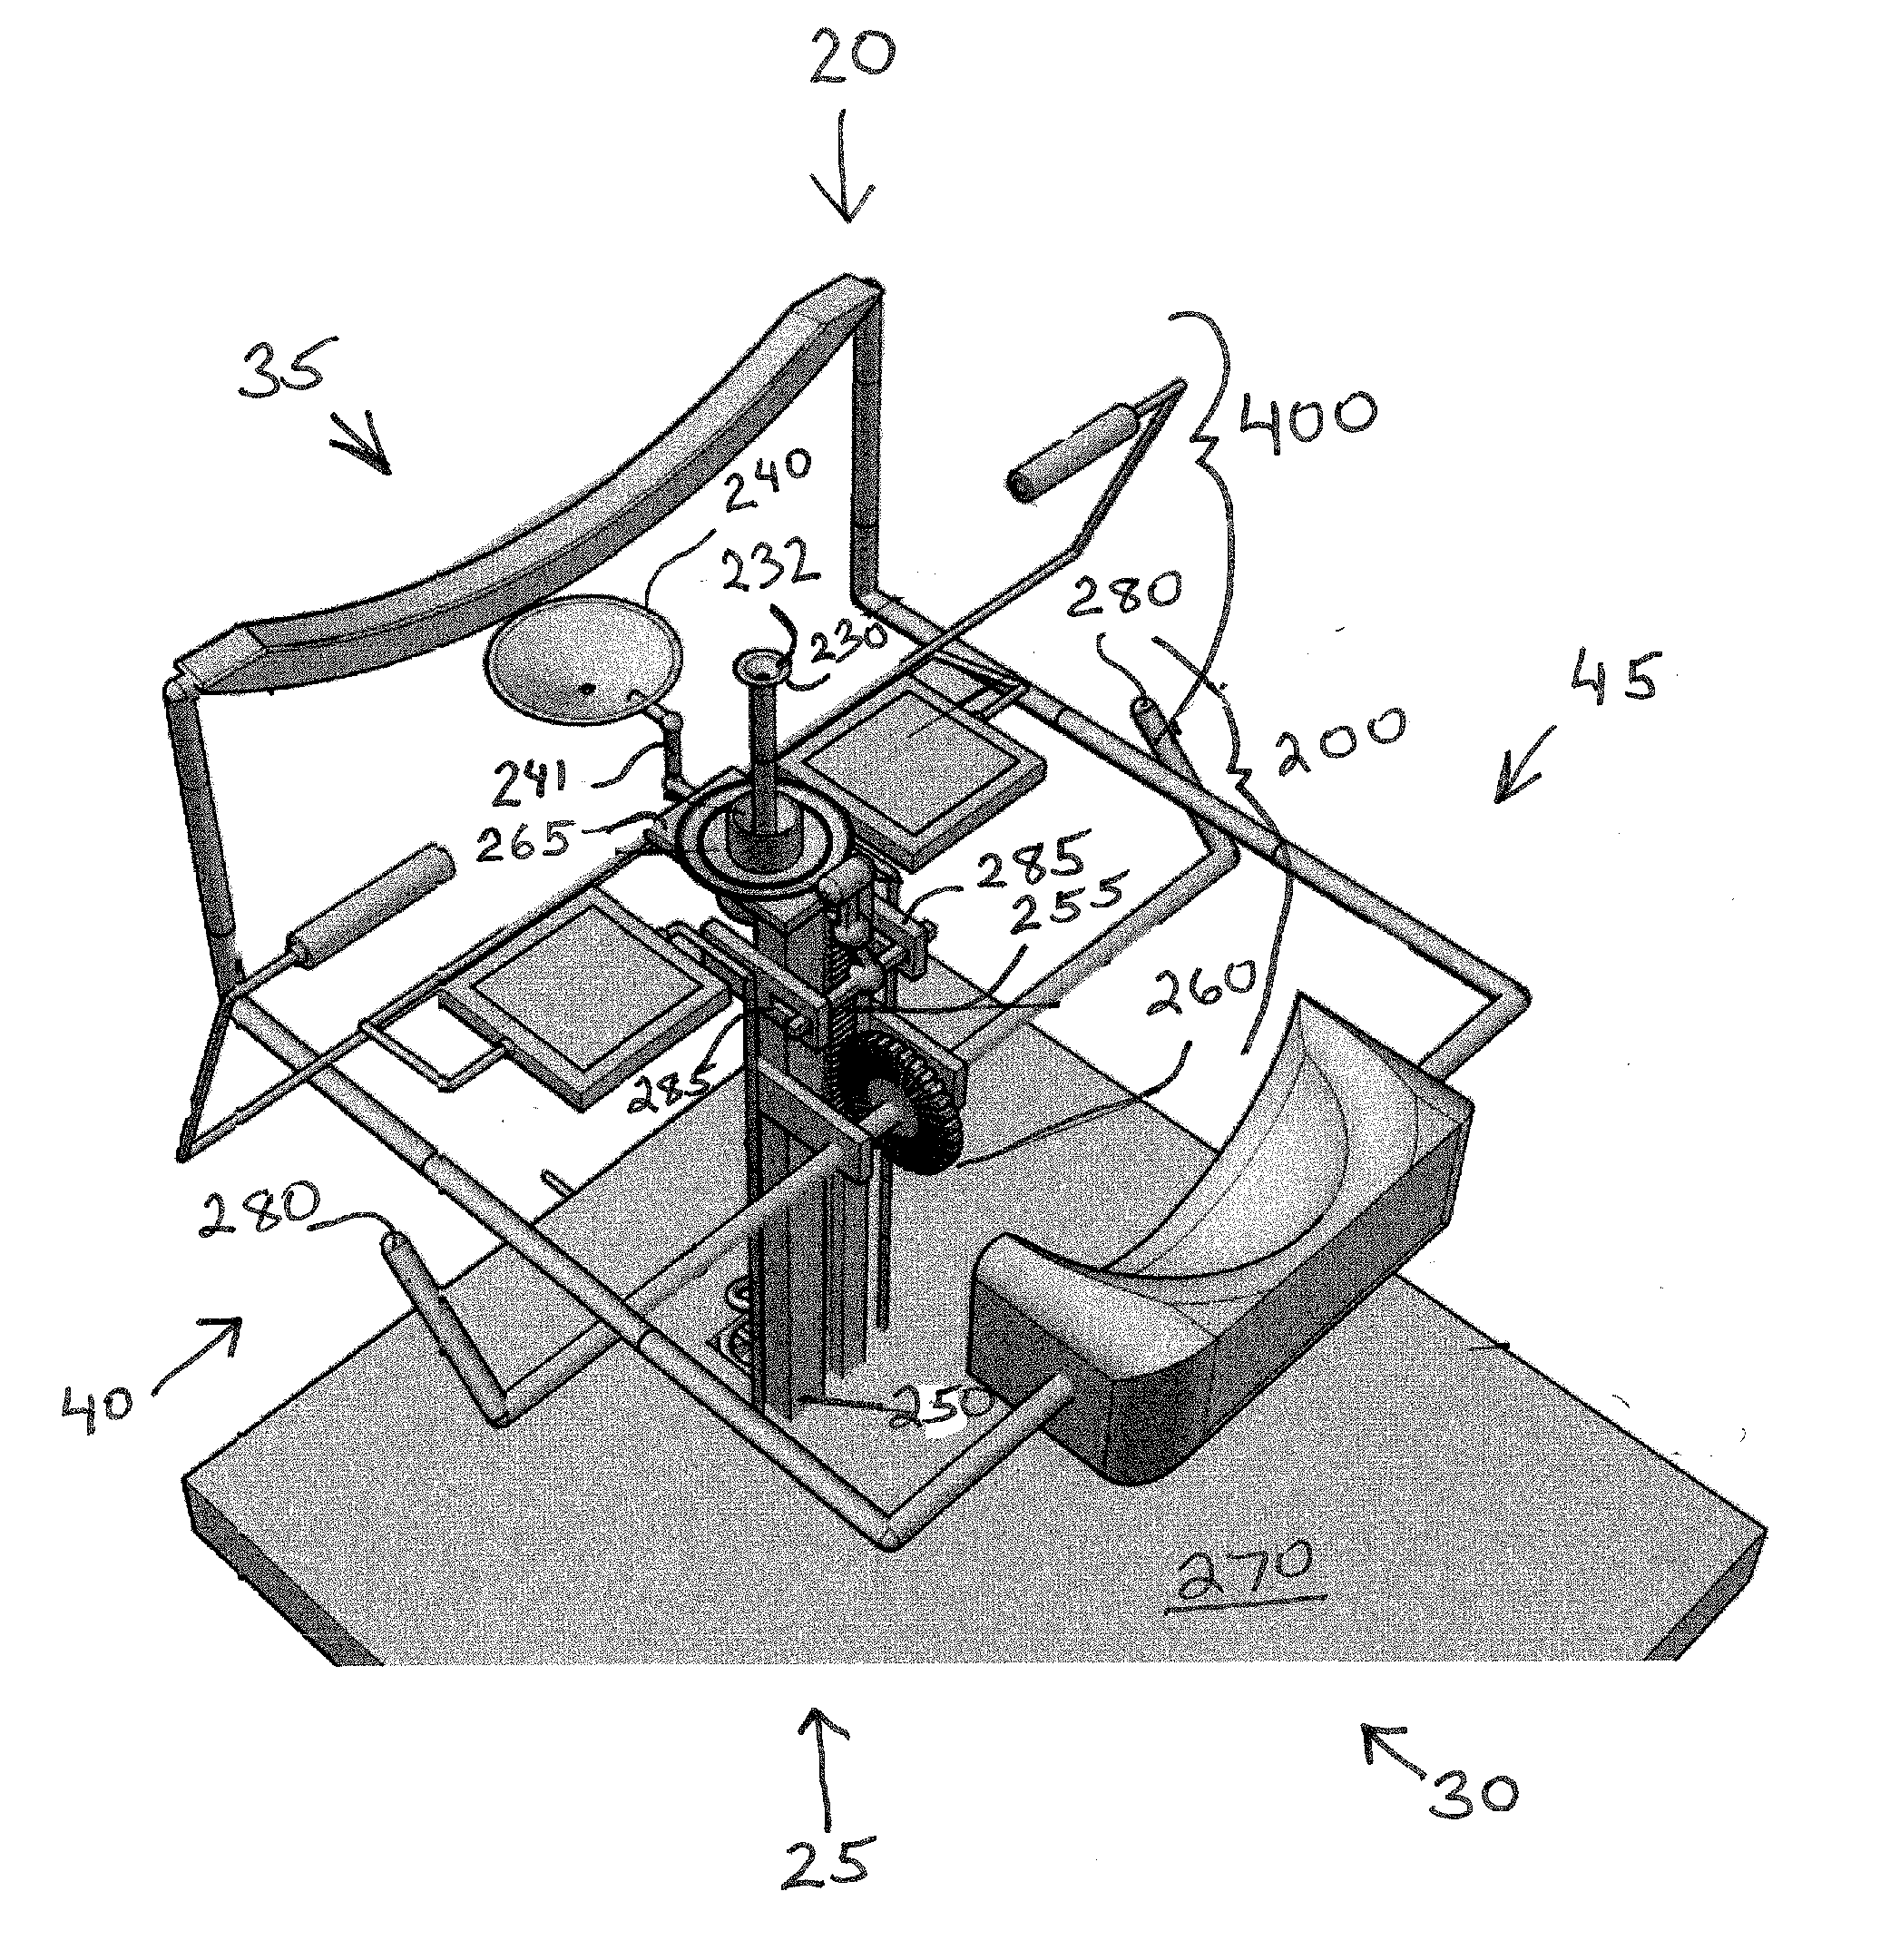 Eye contact lens insertion and removal apparatus